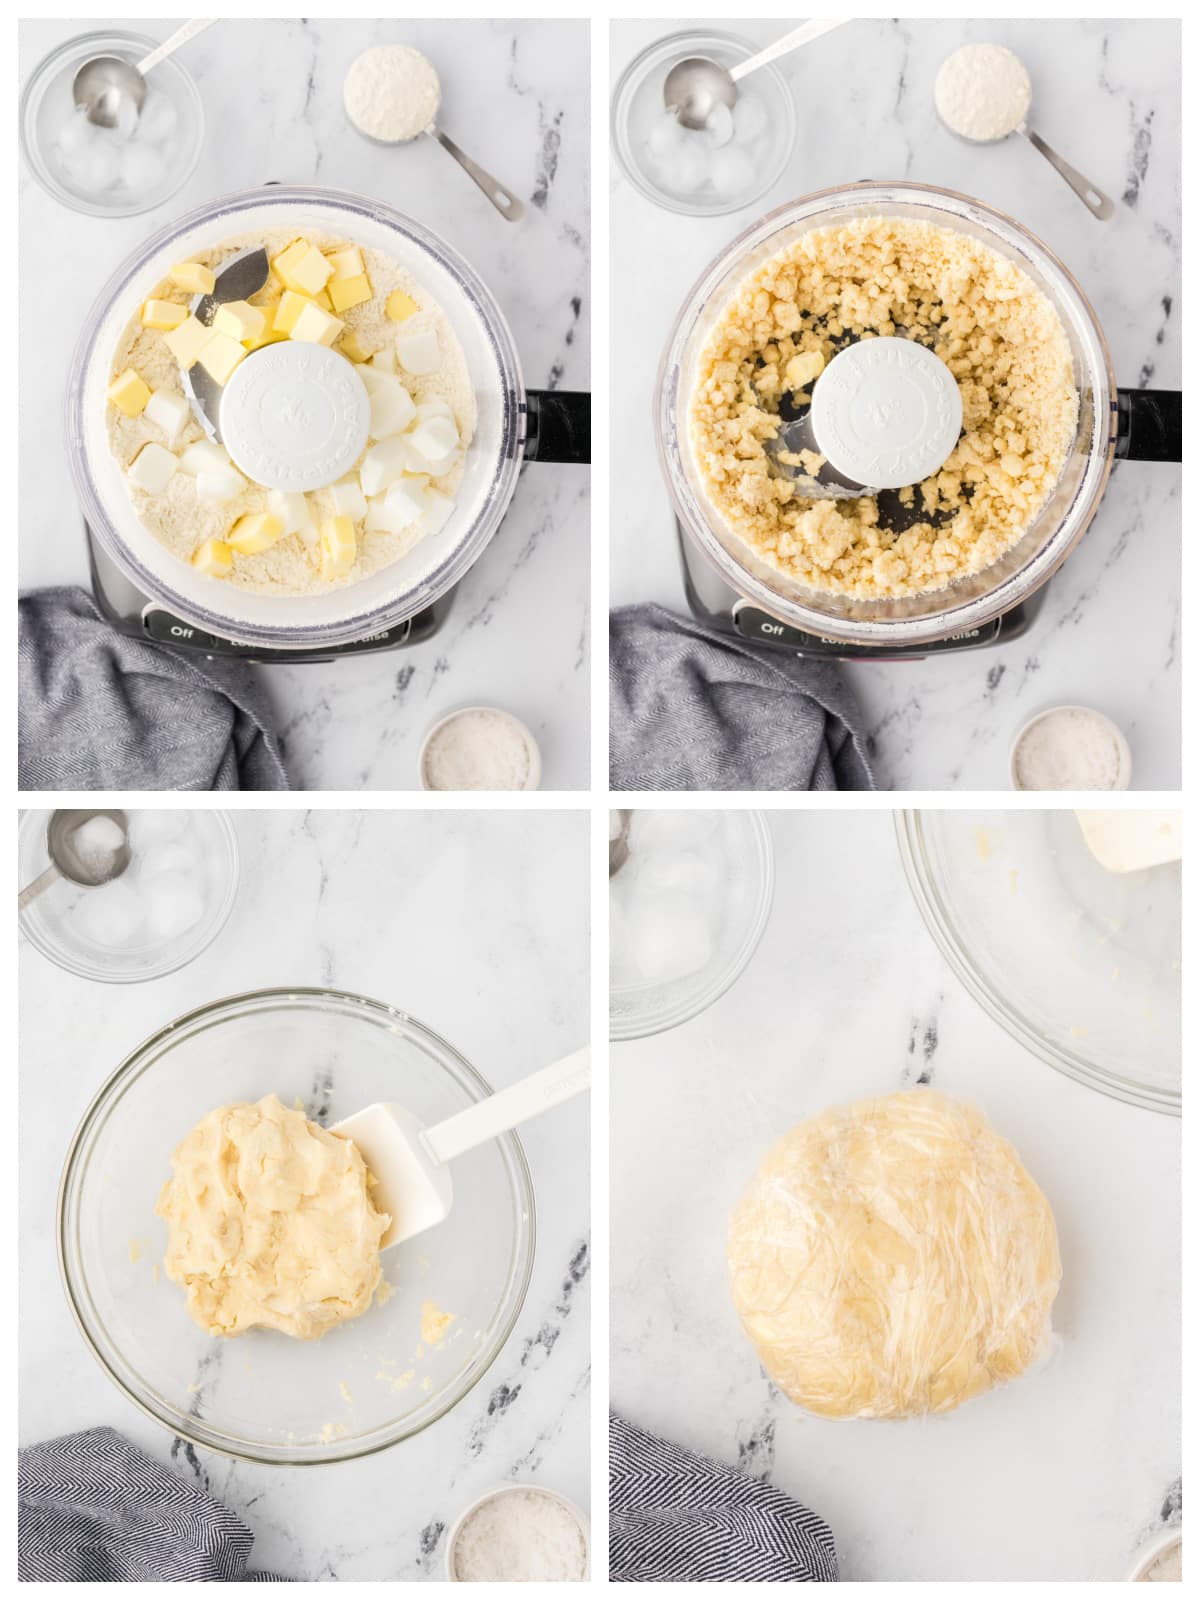 A step by step images showing how to make the pie dough.